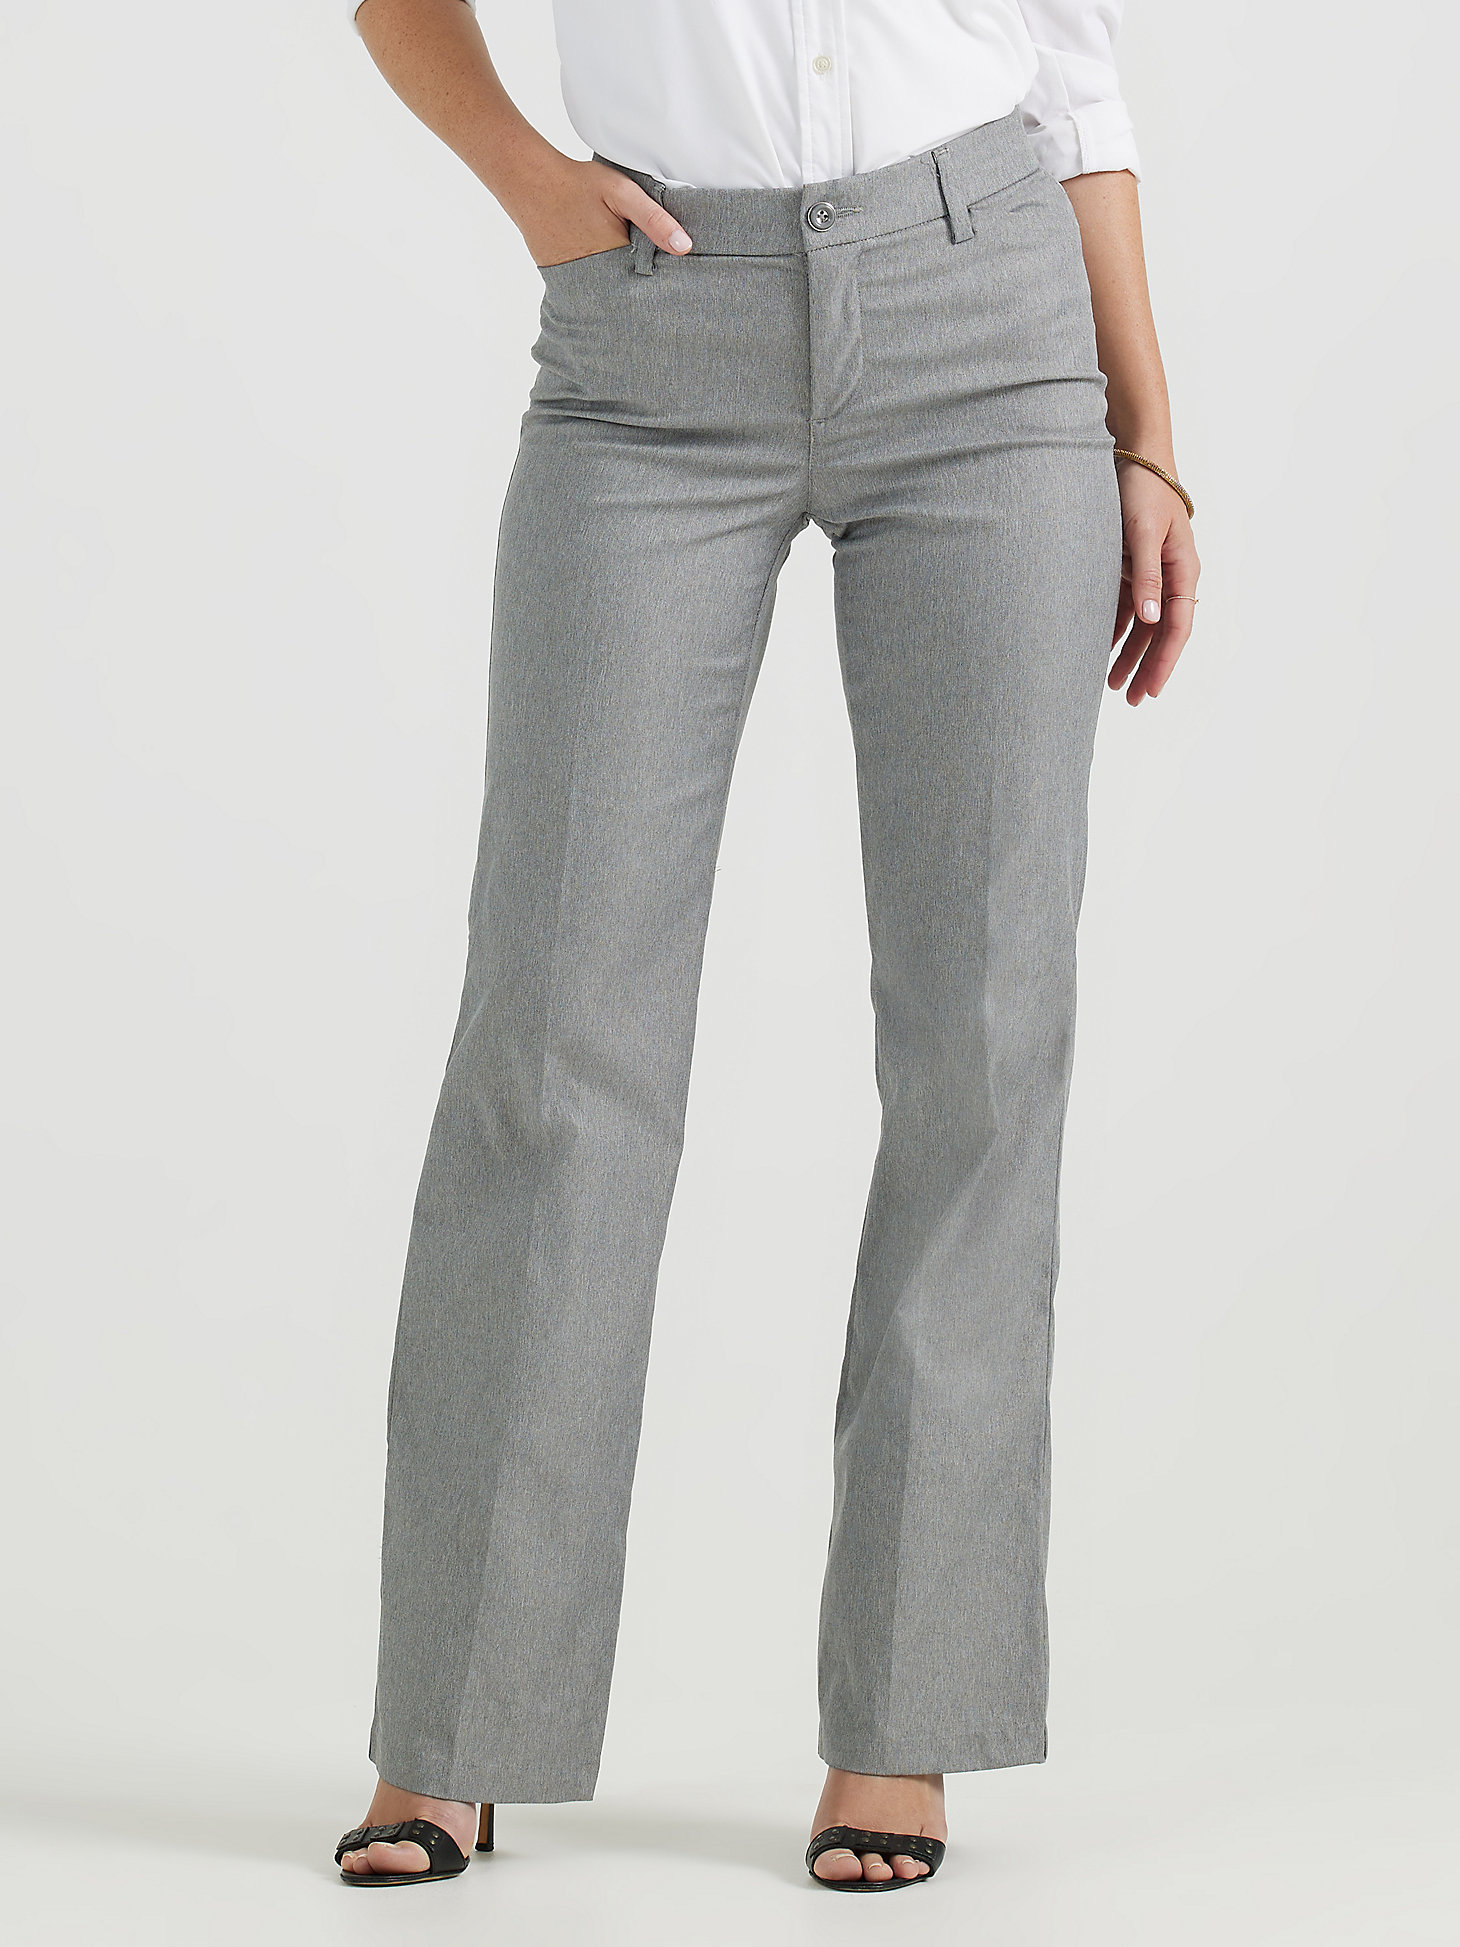 Women's Ultra Lux with Flex Motion Regular Fit Trouser Pant in Ash Heather main view